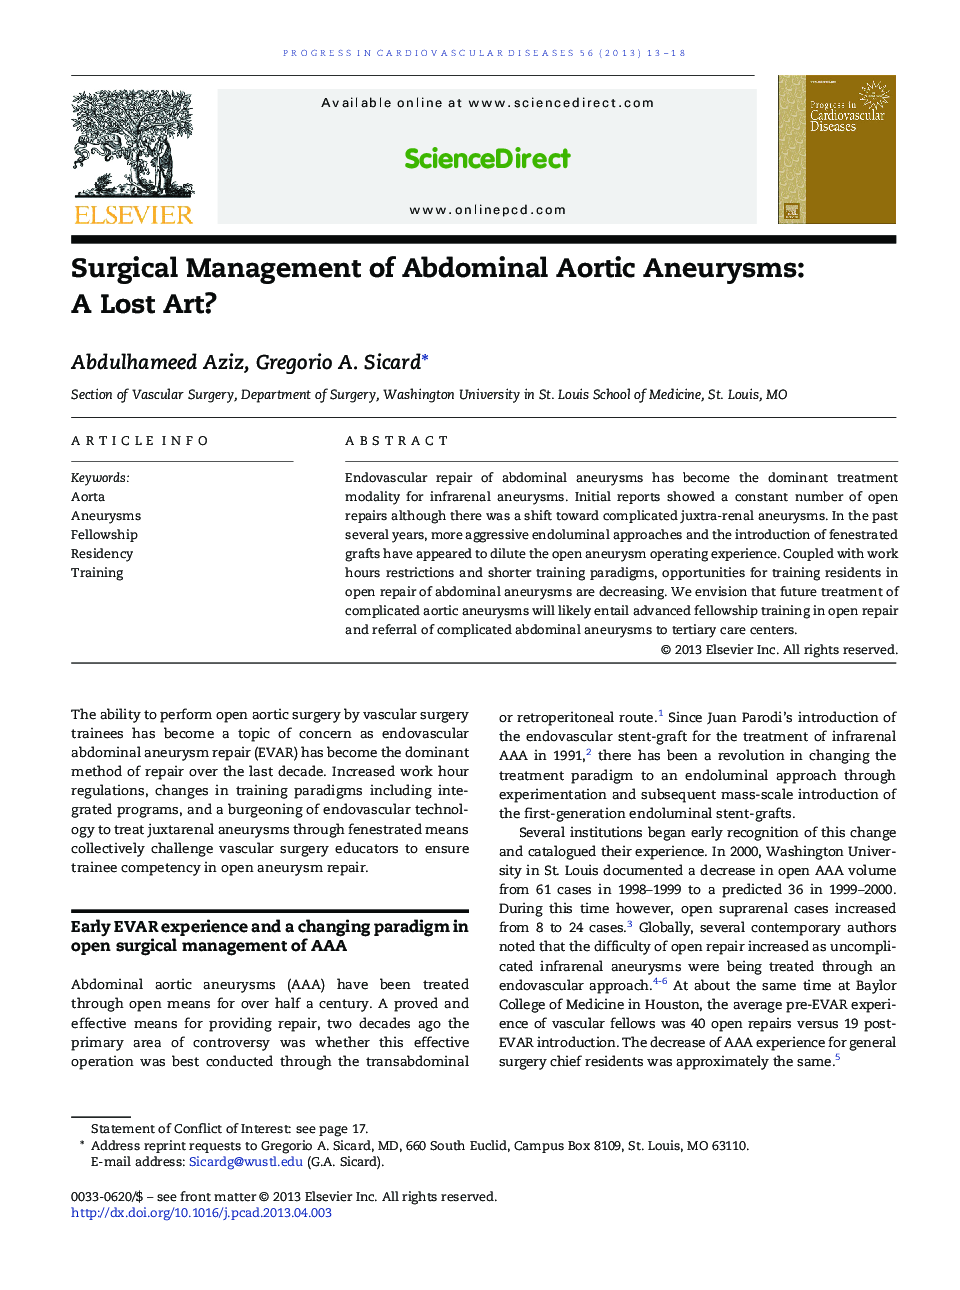 Surgical Management of Abdominal Aortic Aneurysms: A Lost Art? 